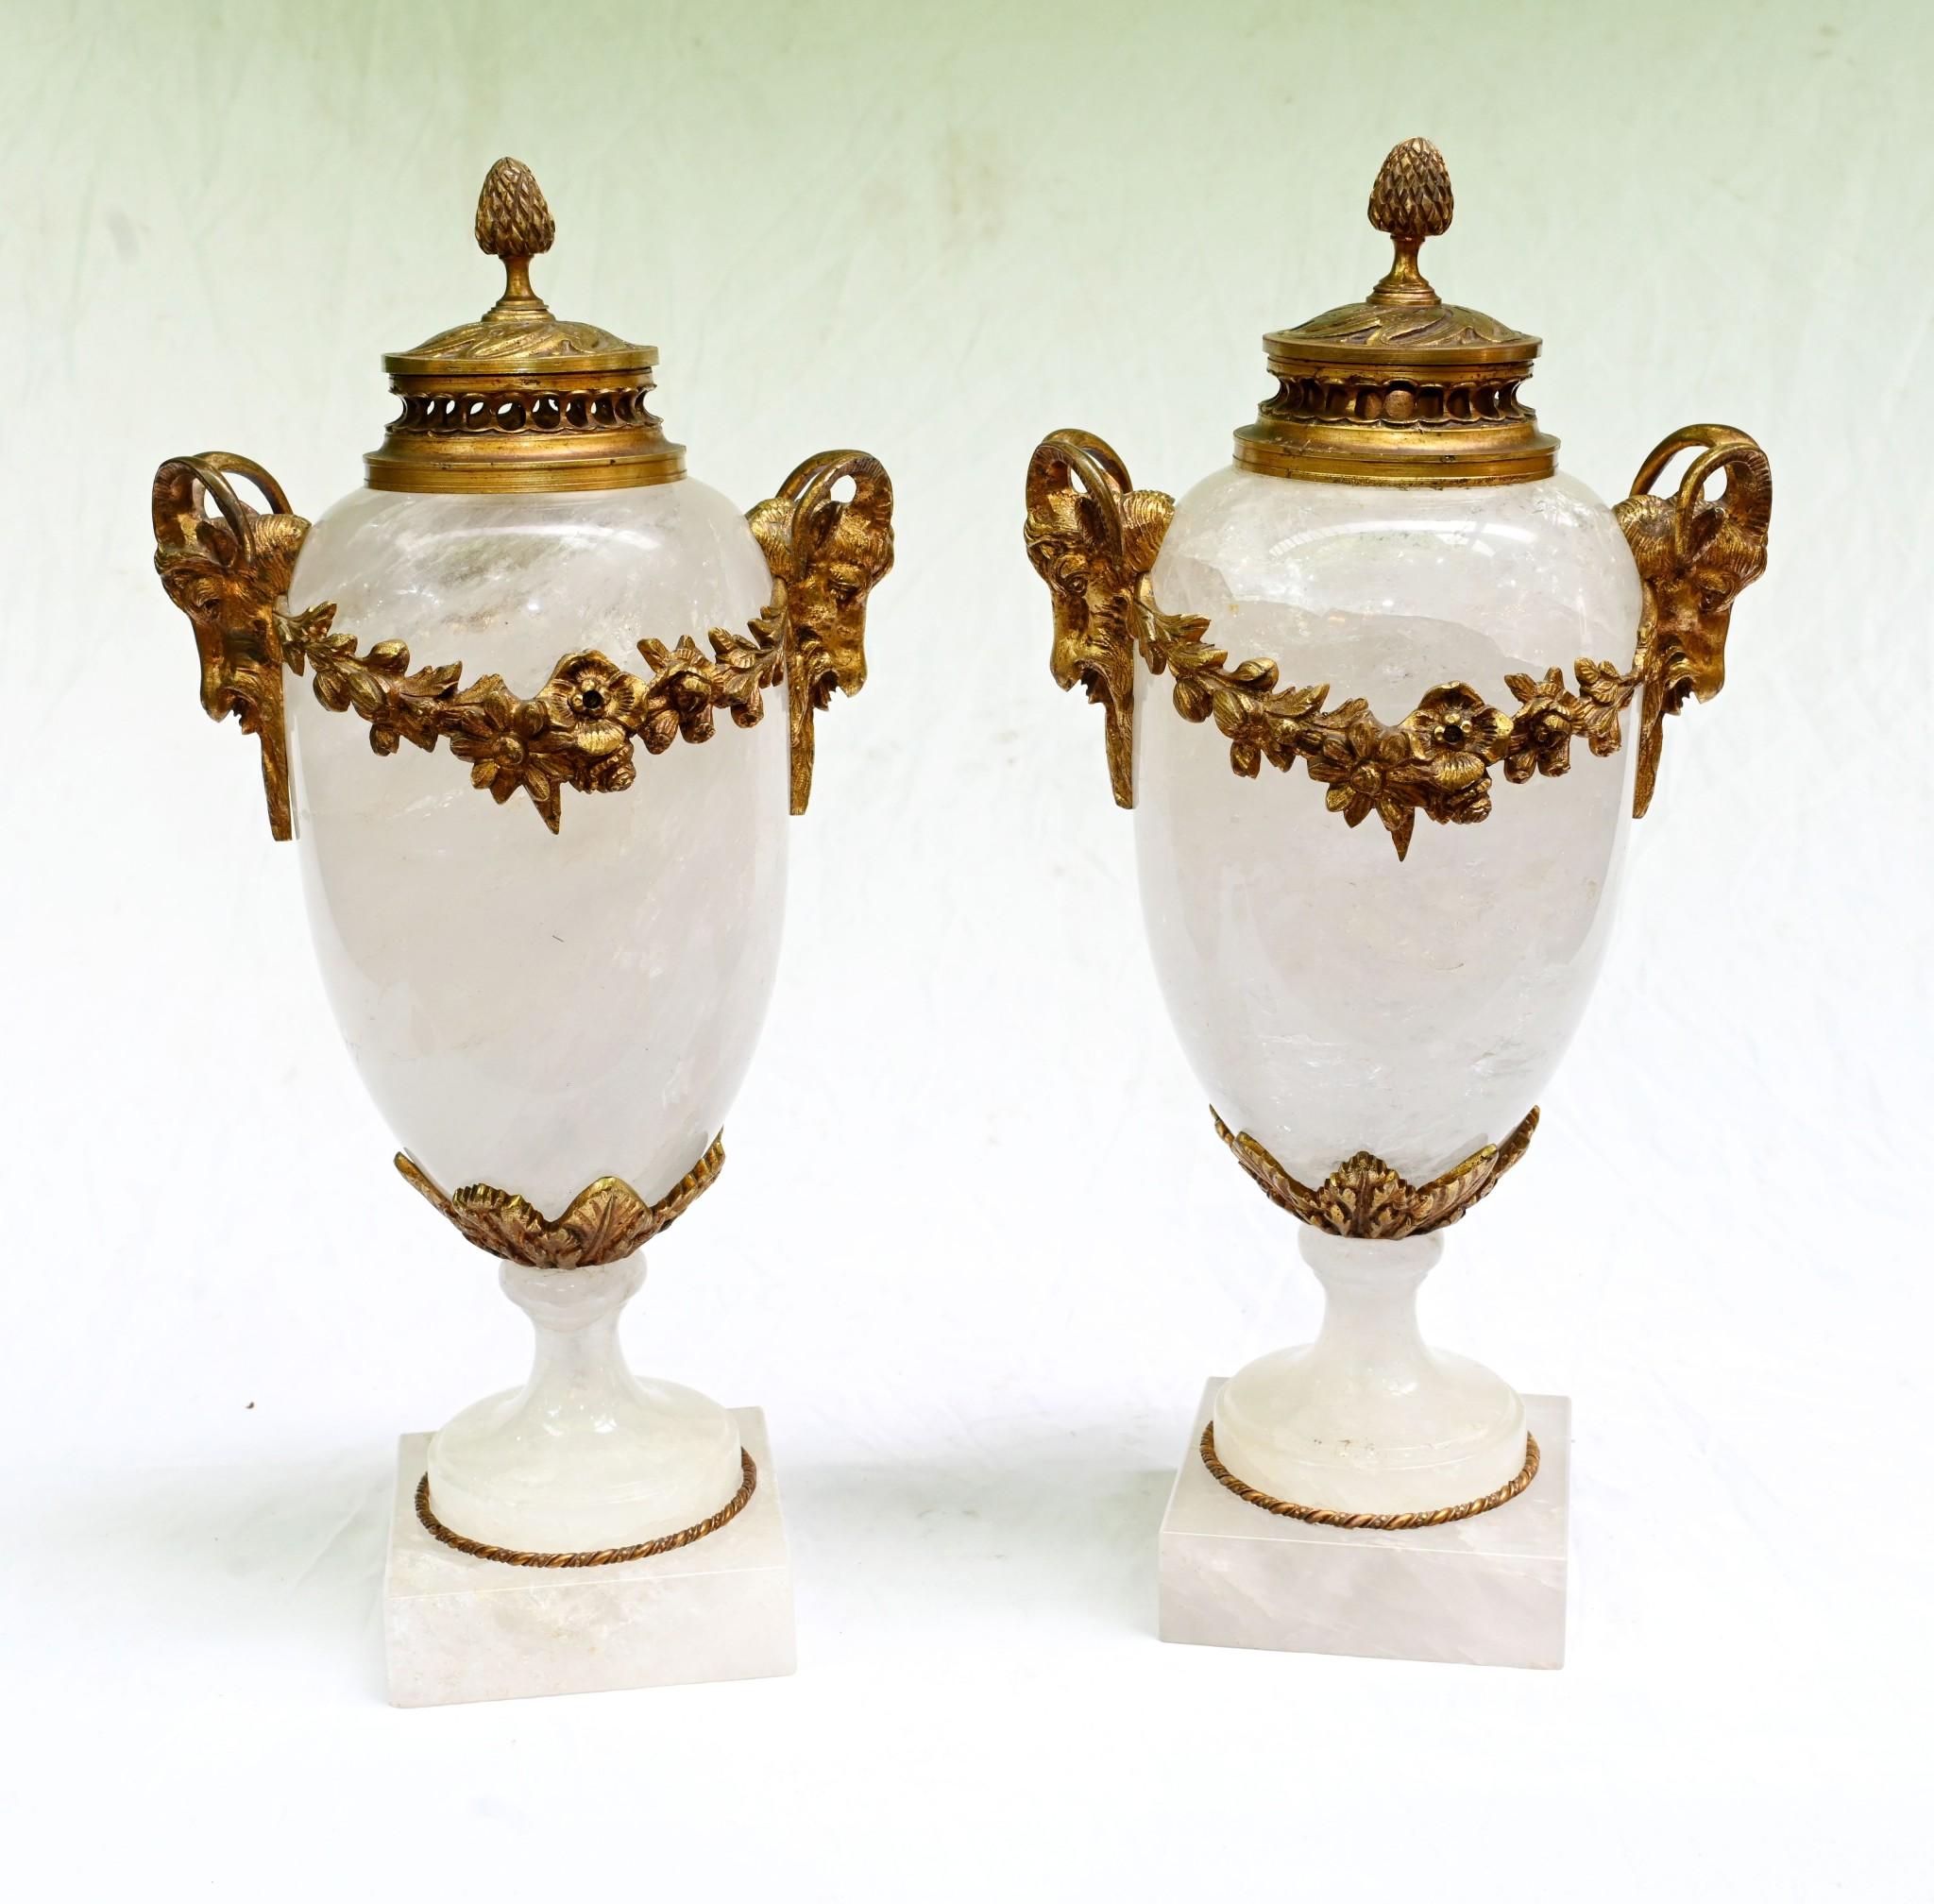 Gorgeous pair of French Cassolette urns crafted from the finest rock crystal
Of Amphora form, these really stand out especially the colour interplay between the rock crystal and gilt
The gilt fixtures include rams head handles, an acanthus soccle